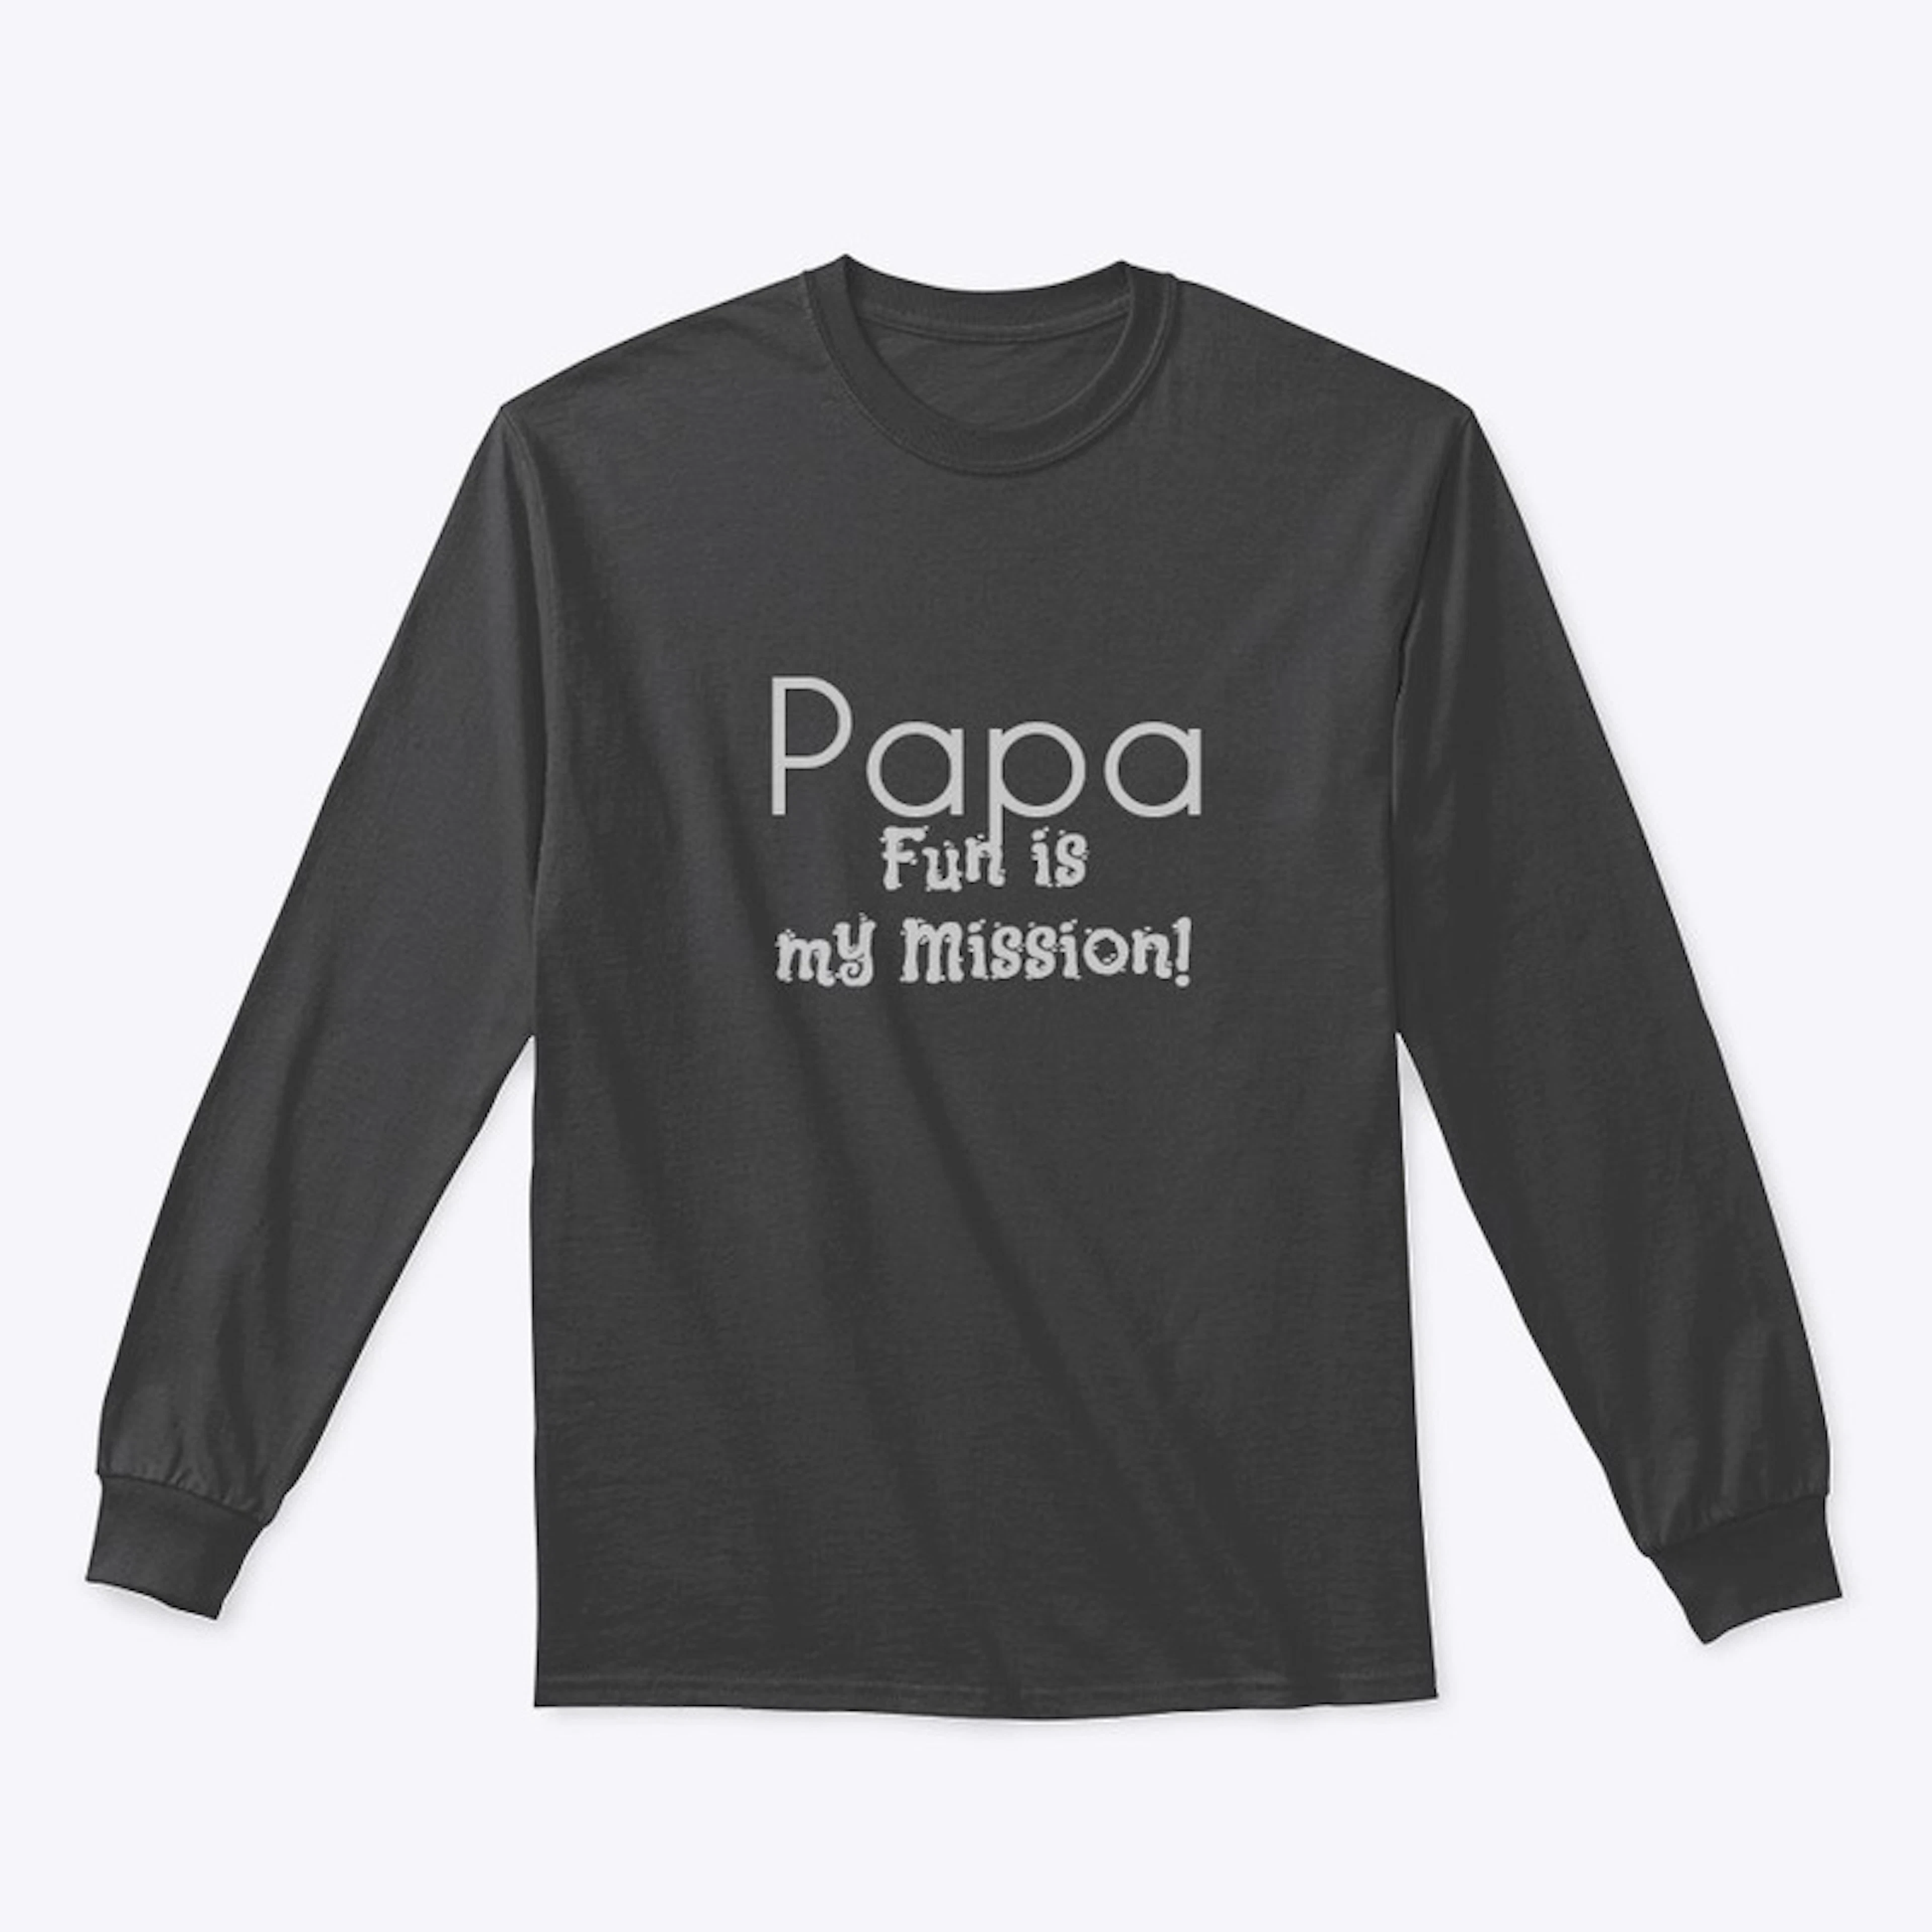 PAPA - Fun is my Mission!